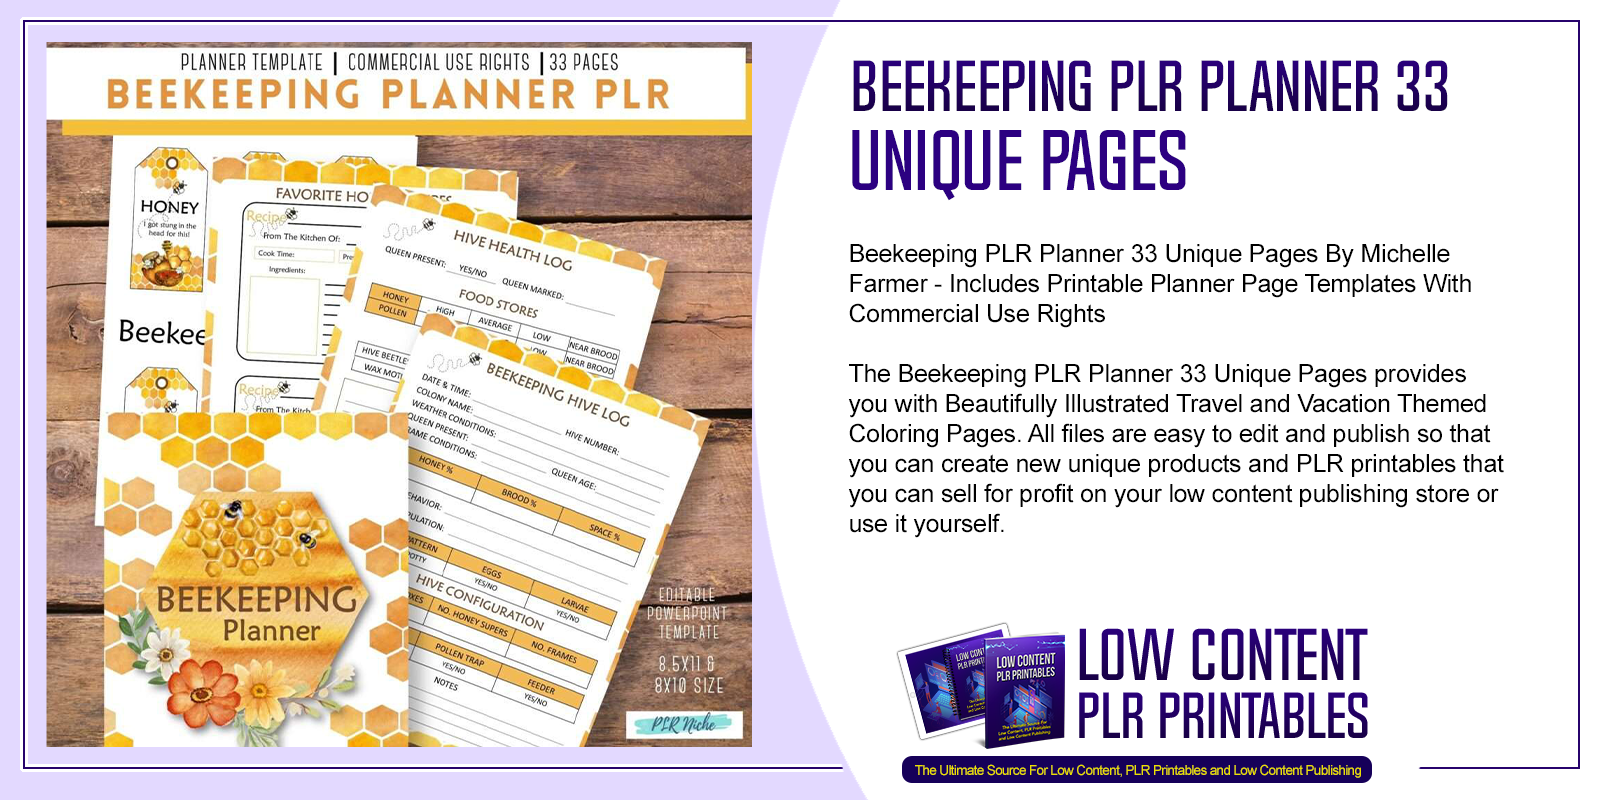 Beekeeping PLR Planner 33 Unique Pages